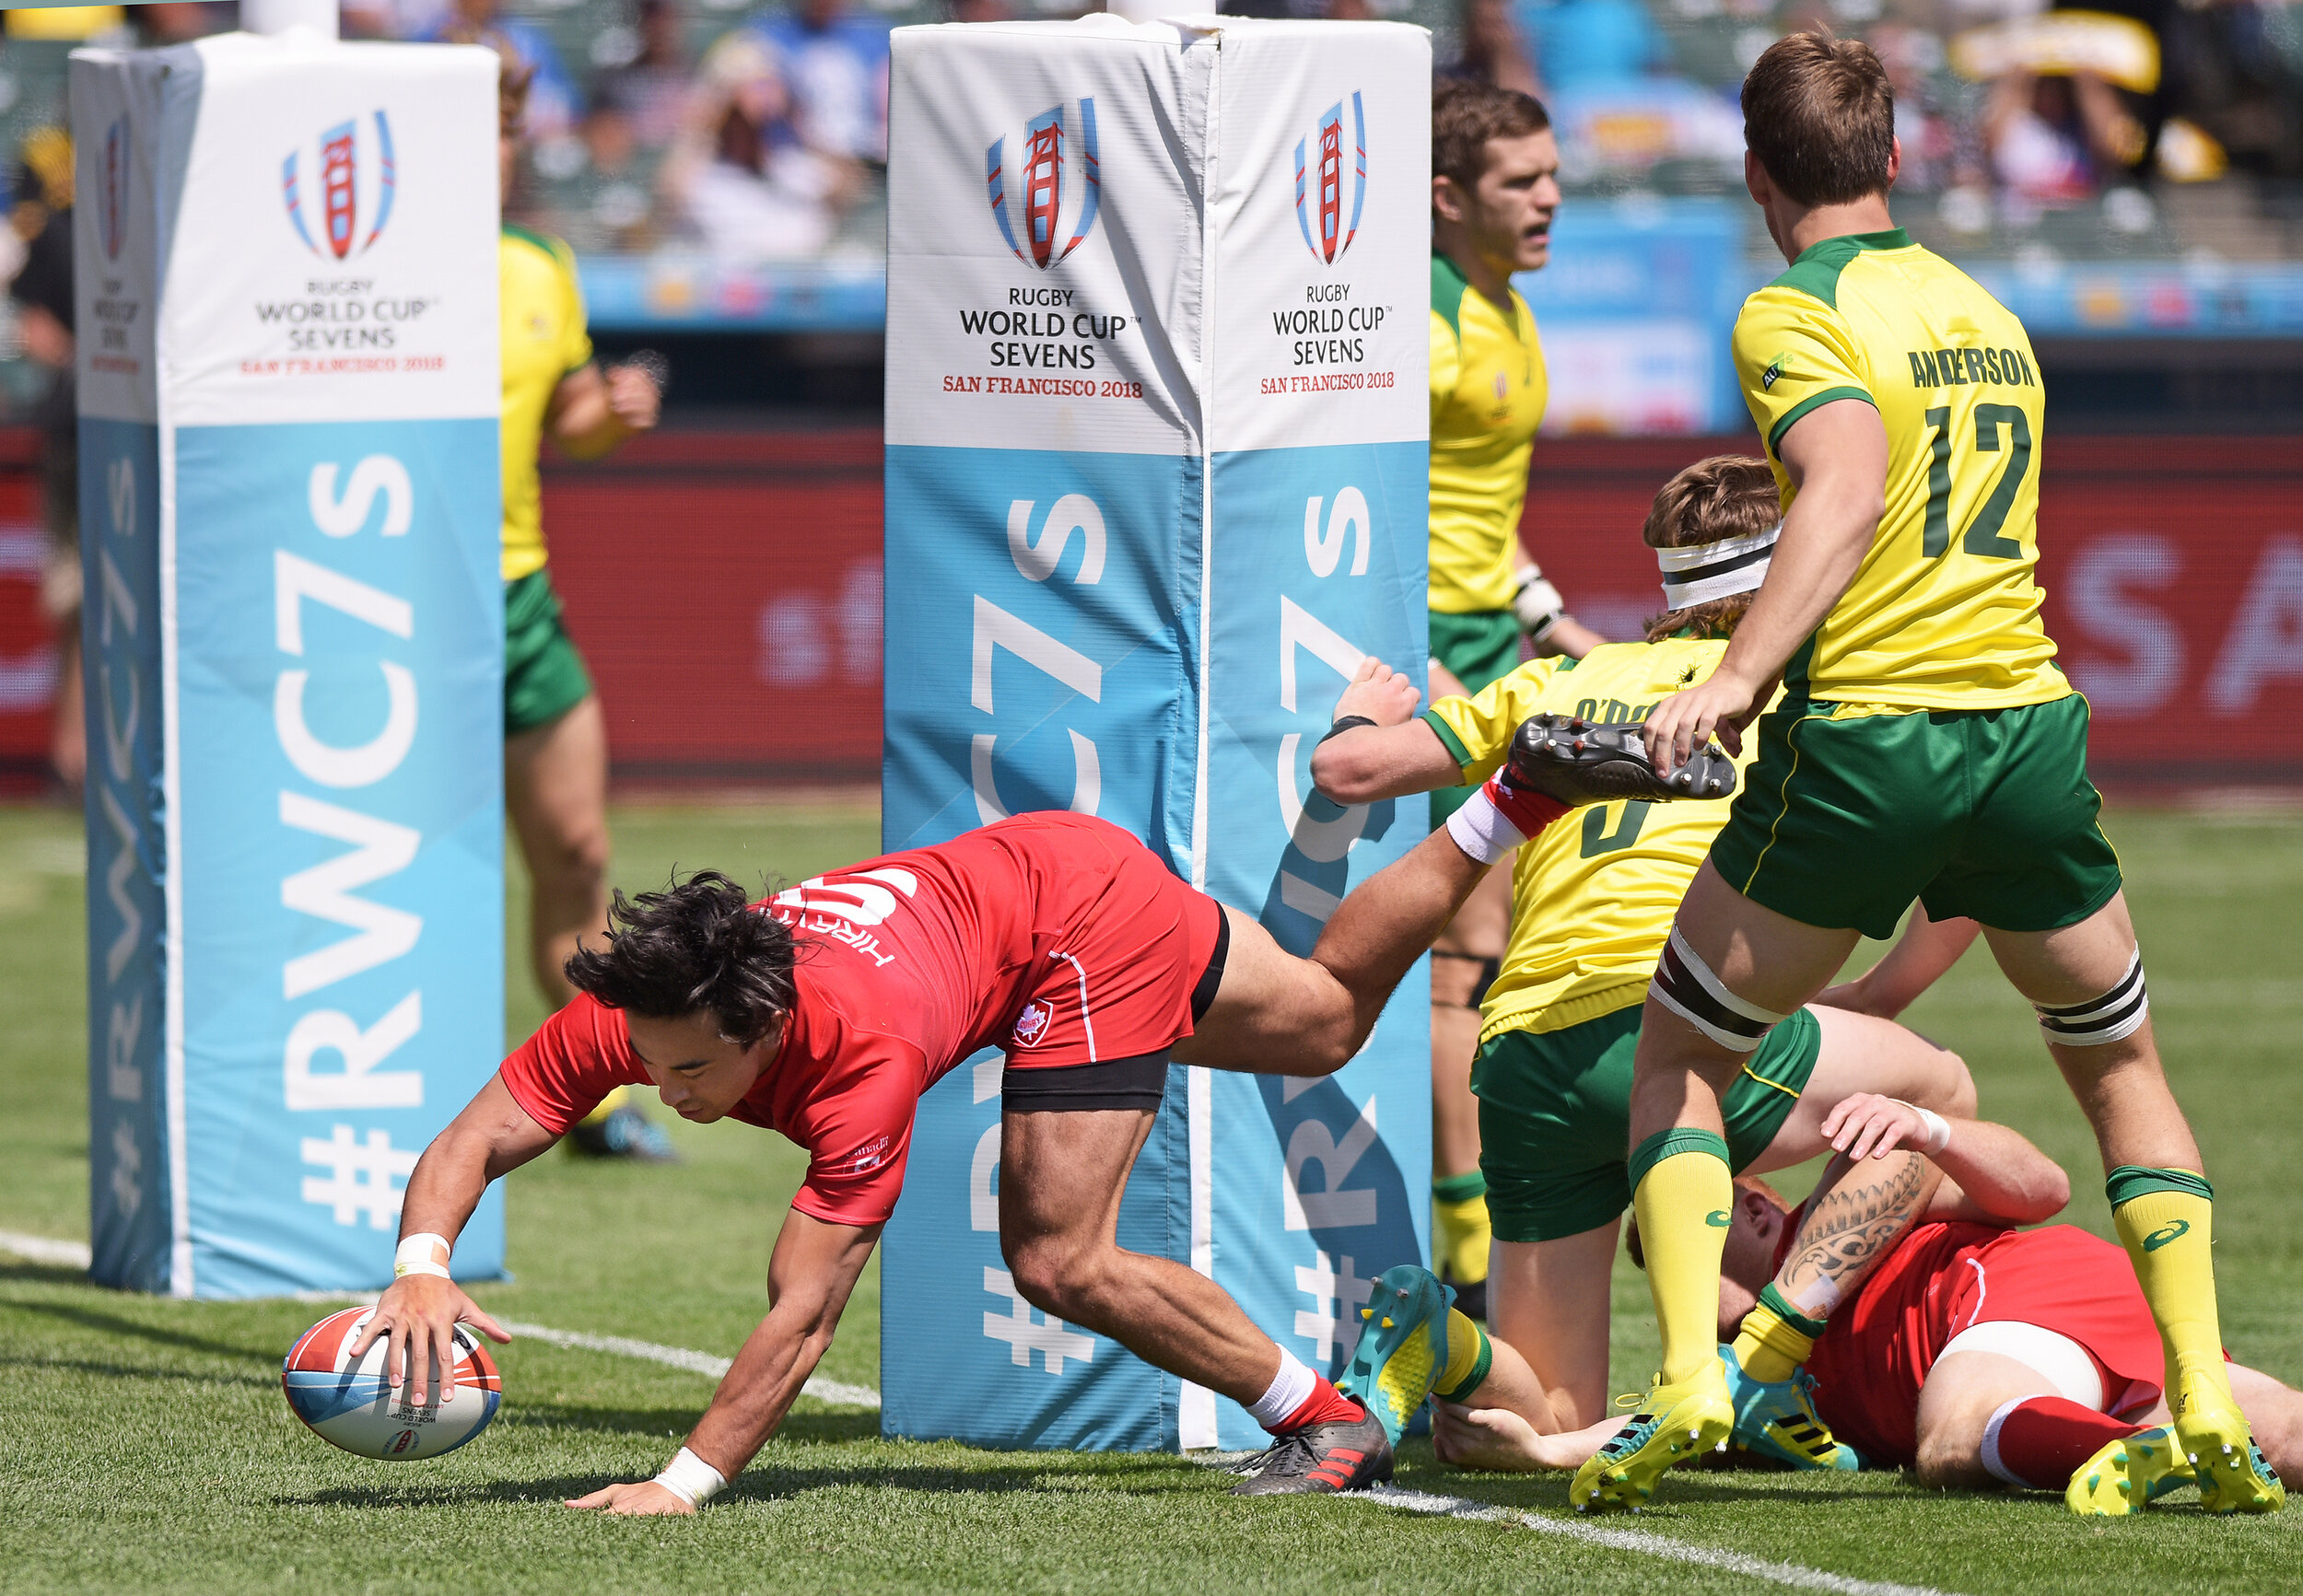 RUGBY WORLD CUP 7s SF 2018 — DRIVExSTRIKE SPORTS